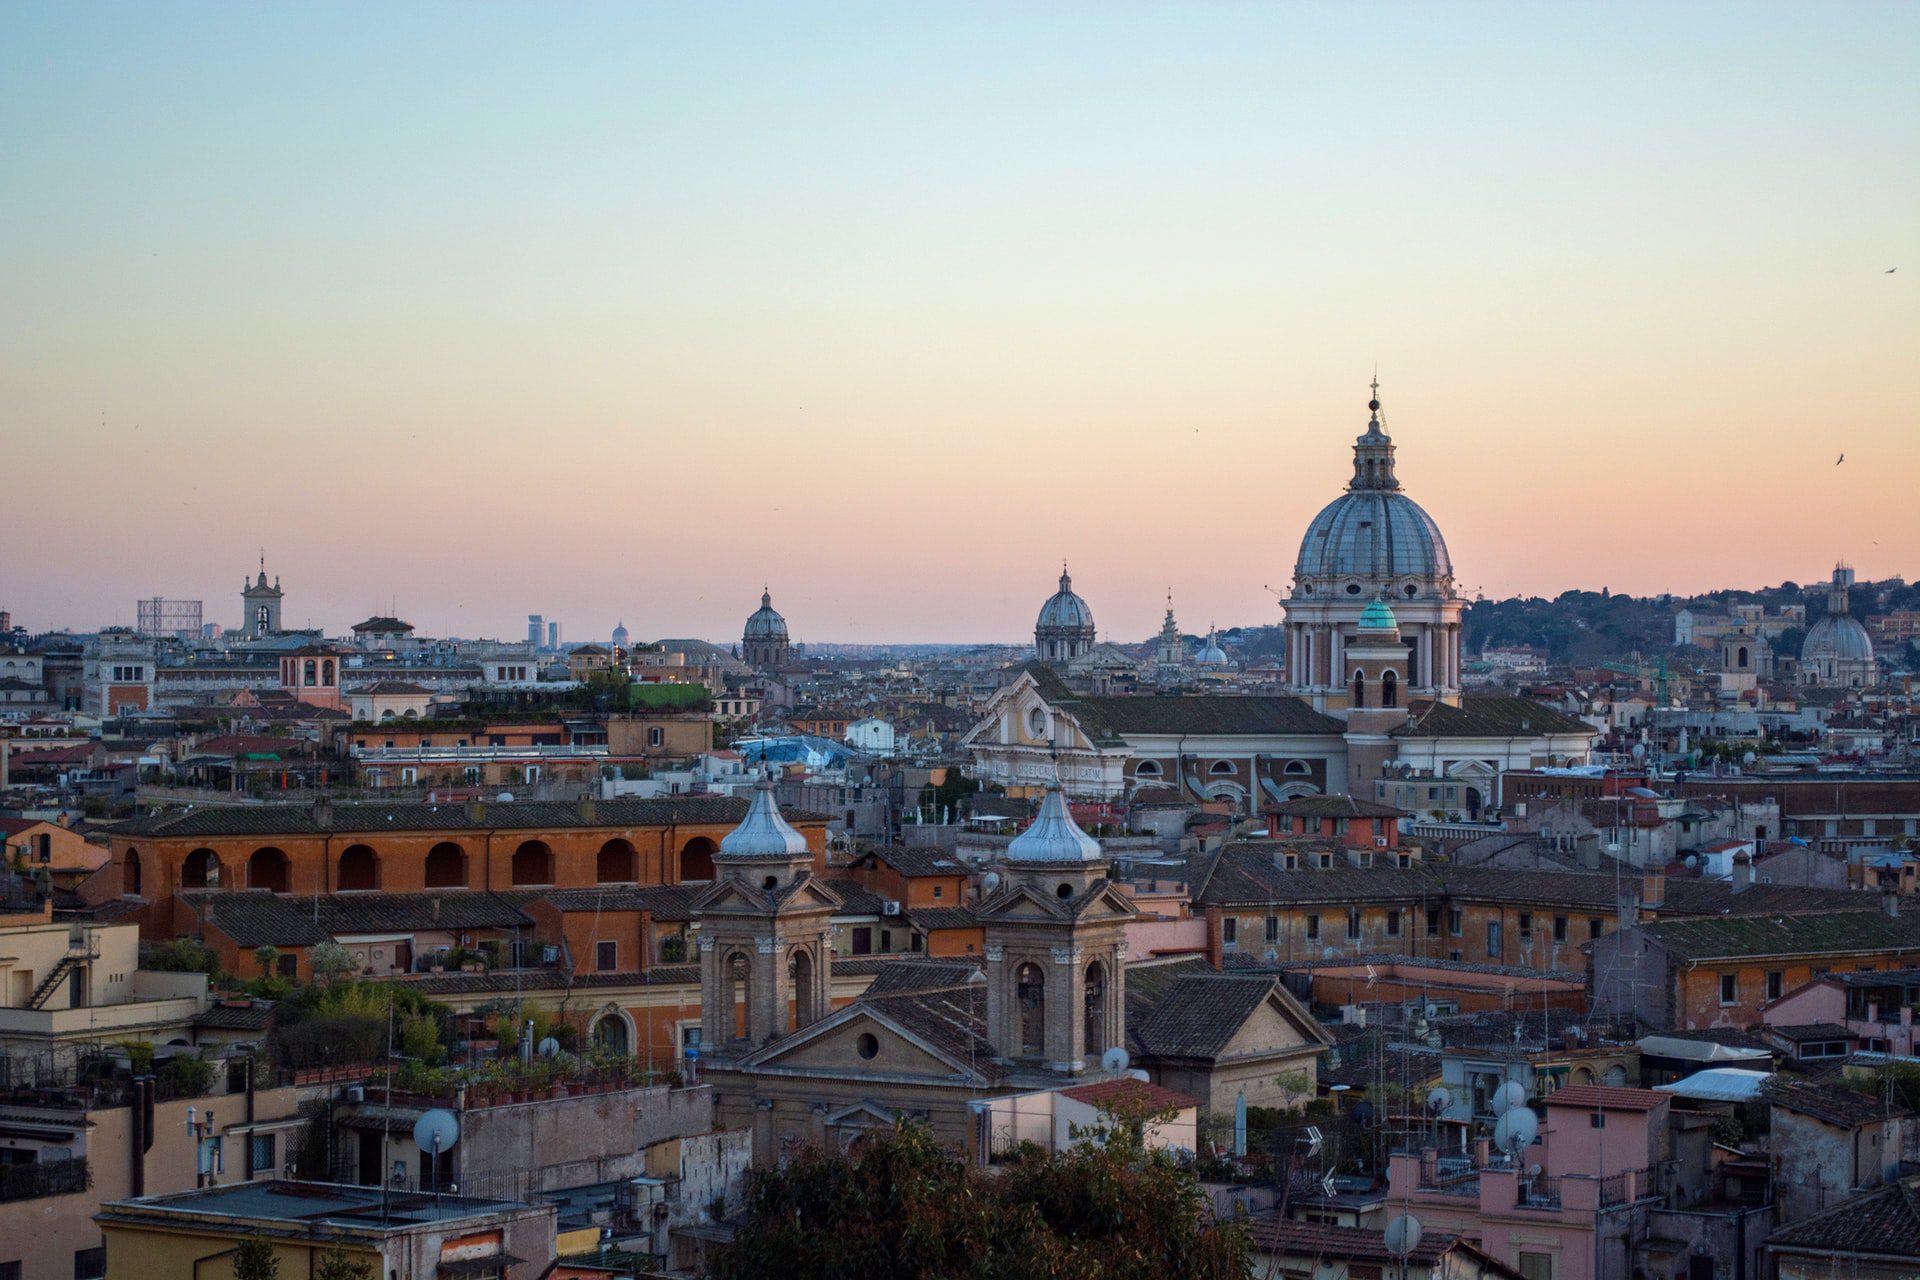 Rome has drafted a decree which lists ways it can offload its holding in the airline, including a direct sale or a public offer, without setting a deadline for a deal.